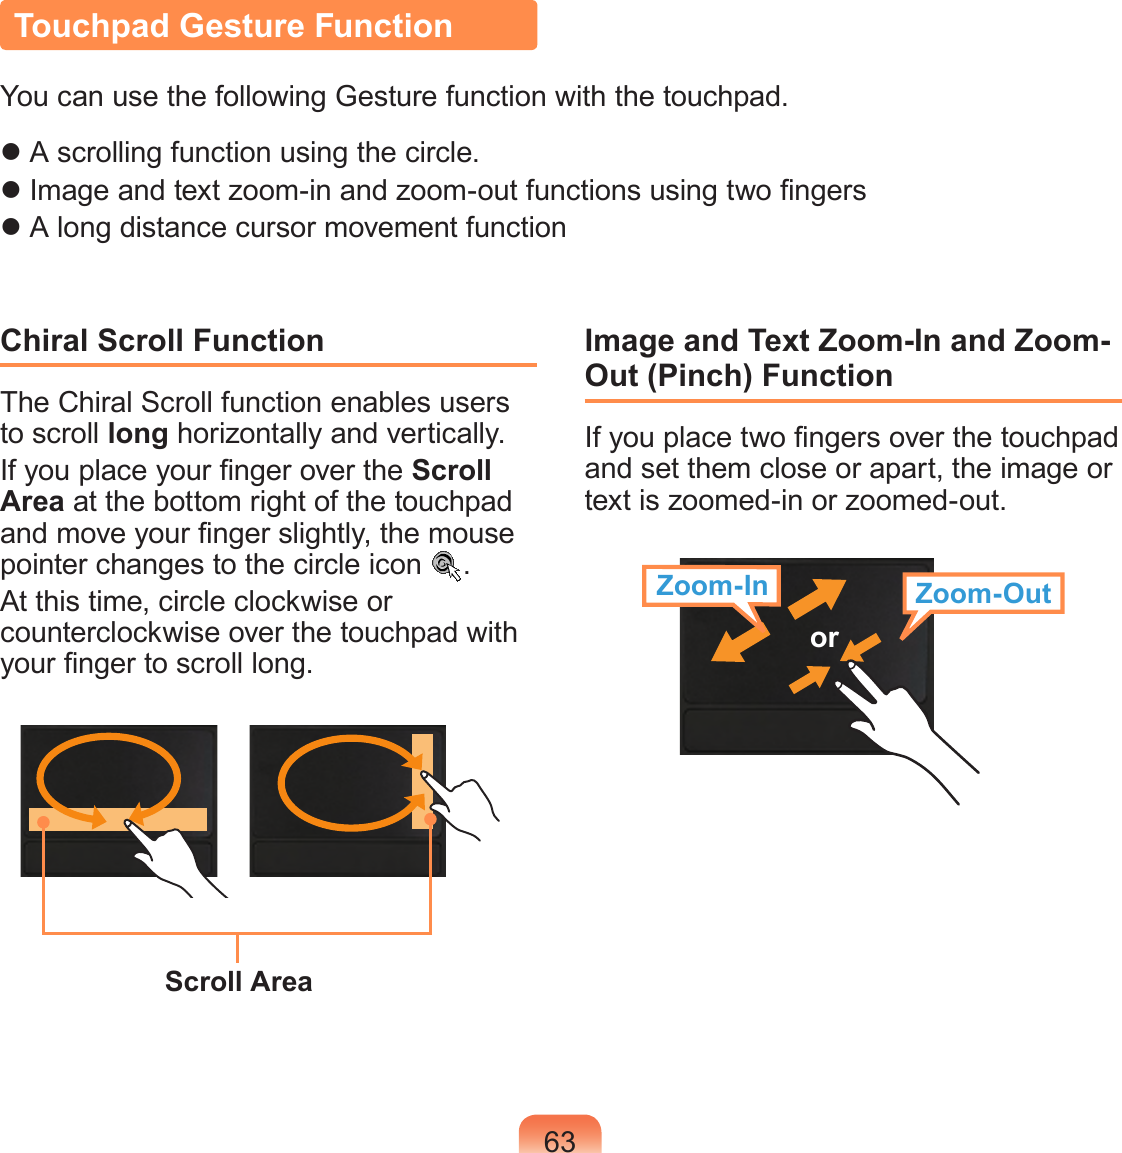 63Touchpad Gesture FunctionYou can use the following Gesture function with the touchpad. A scrolling function using the circle. Image and text zoom-in and zoom-out functions using two ngers A long distance cursor movement functionChiral Scroll FunctionThe Chiral Scroll function enables users to scroll long horizontally and vertically.If you place your nger over the Scroll Area at the bottom right of the touchpad and move your nger slightly, the mouse pointer changes to the circle icon  .At this time, circle clockwise or counterclockwise over the touchpad with your nger to scroll long.Scroll AreaImage and Text Zoom-In and Zoom-Out (Pinch) FunctionIf you place two ngers over the touchpad and set them close or apart, the image or text is zoomed-in or zoomed-out.Zoom-In Zoom-Outor